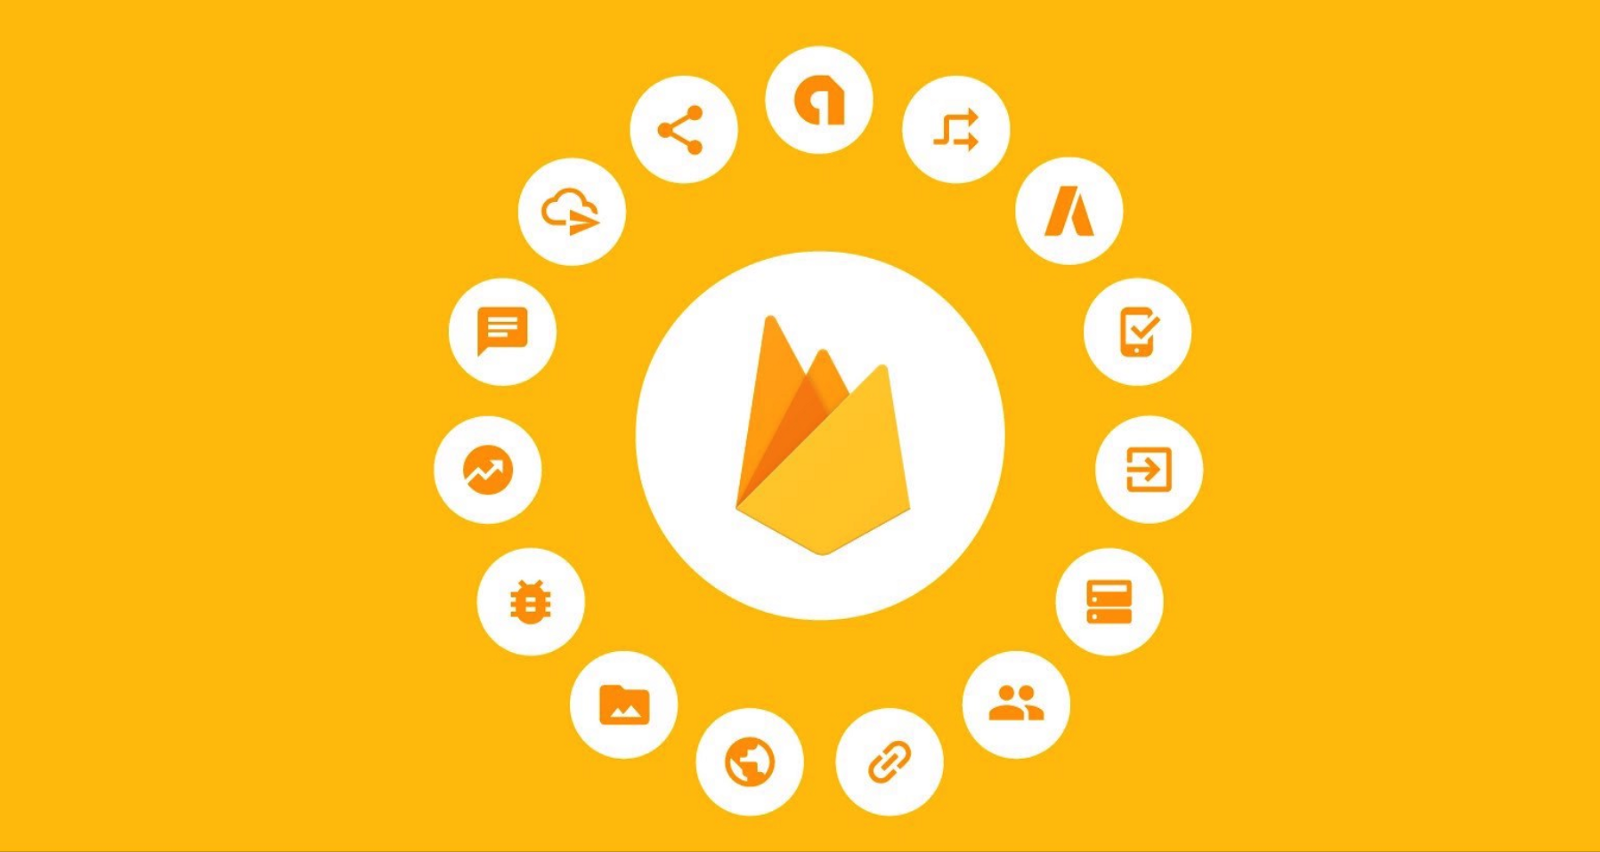 Working with Firebase